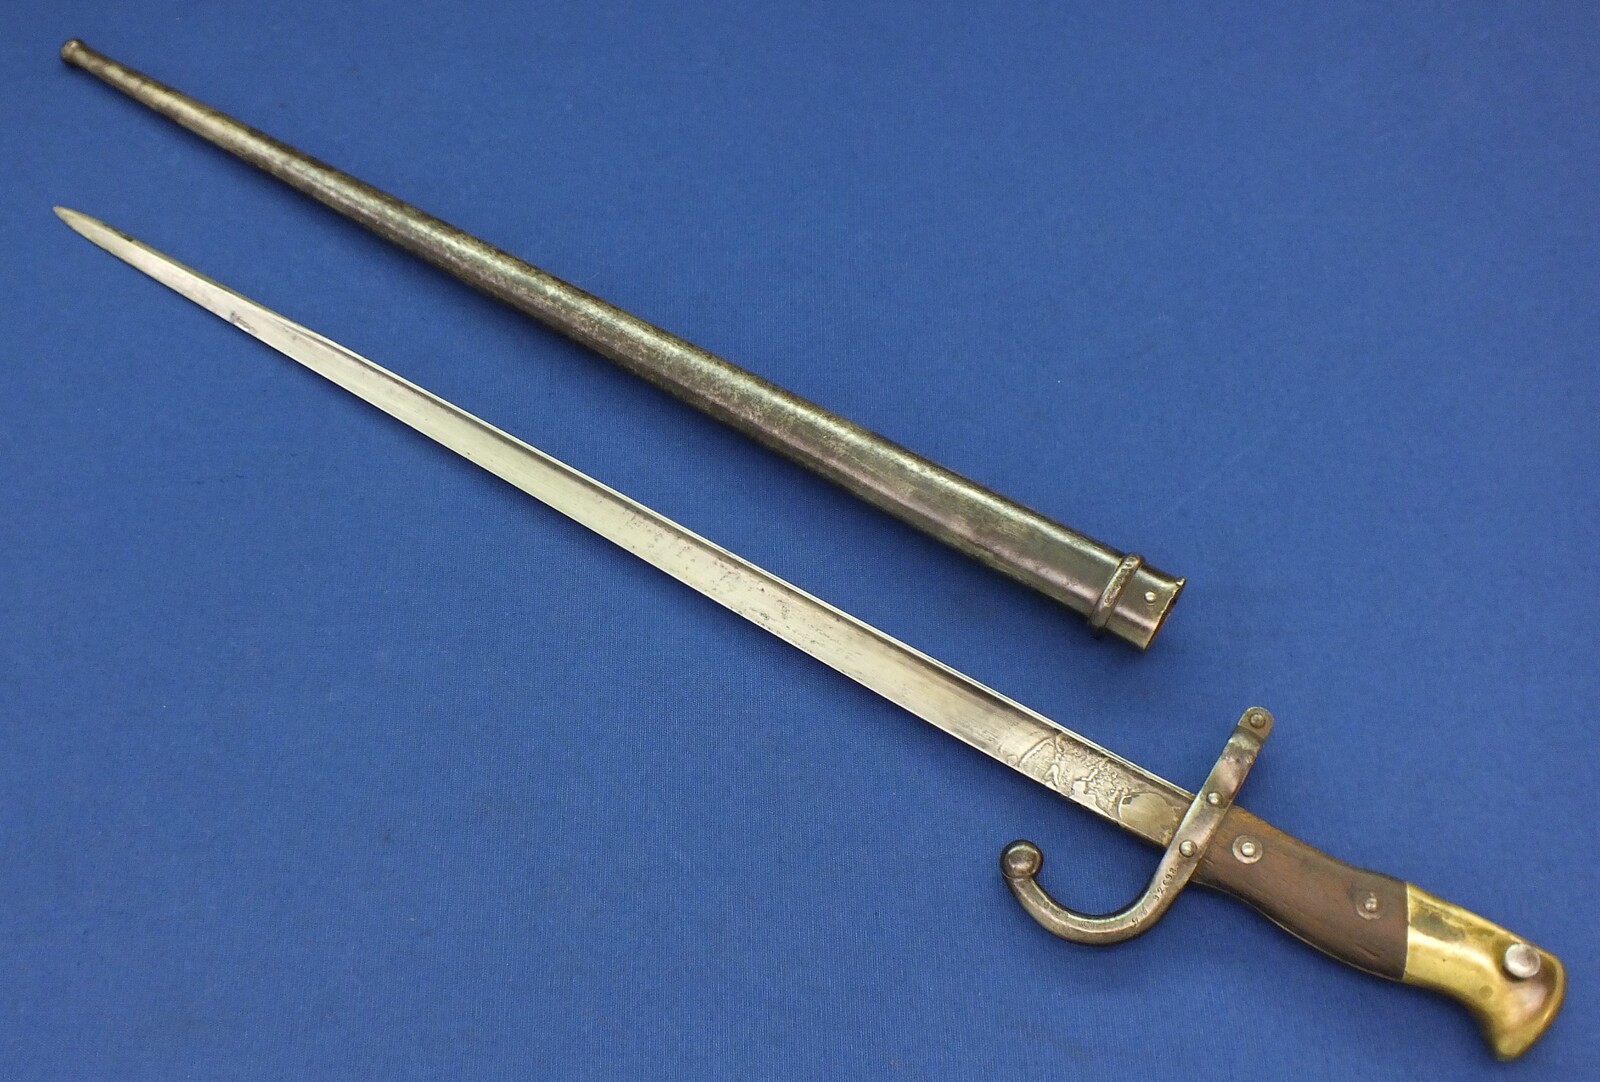 An antique French Model 1874 Gras Bayonet by L. Deny Paris 1881. SN92698, scabbard 40248. Length 66cm. In very good condition. Price 195 euro